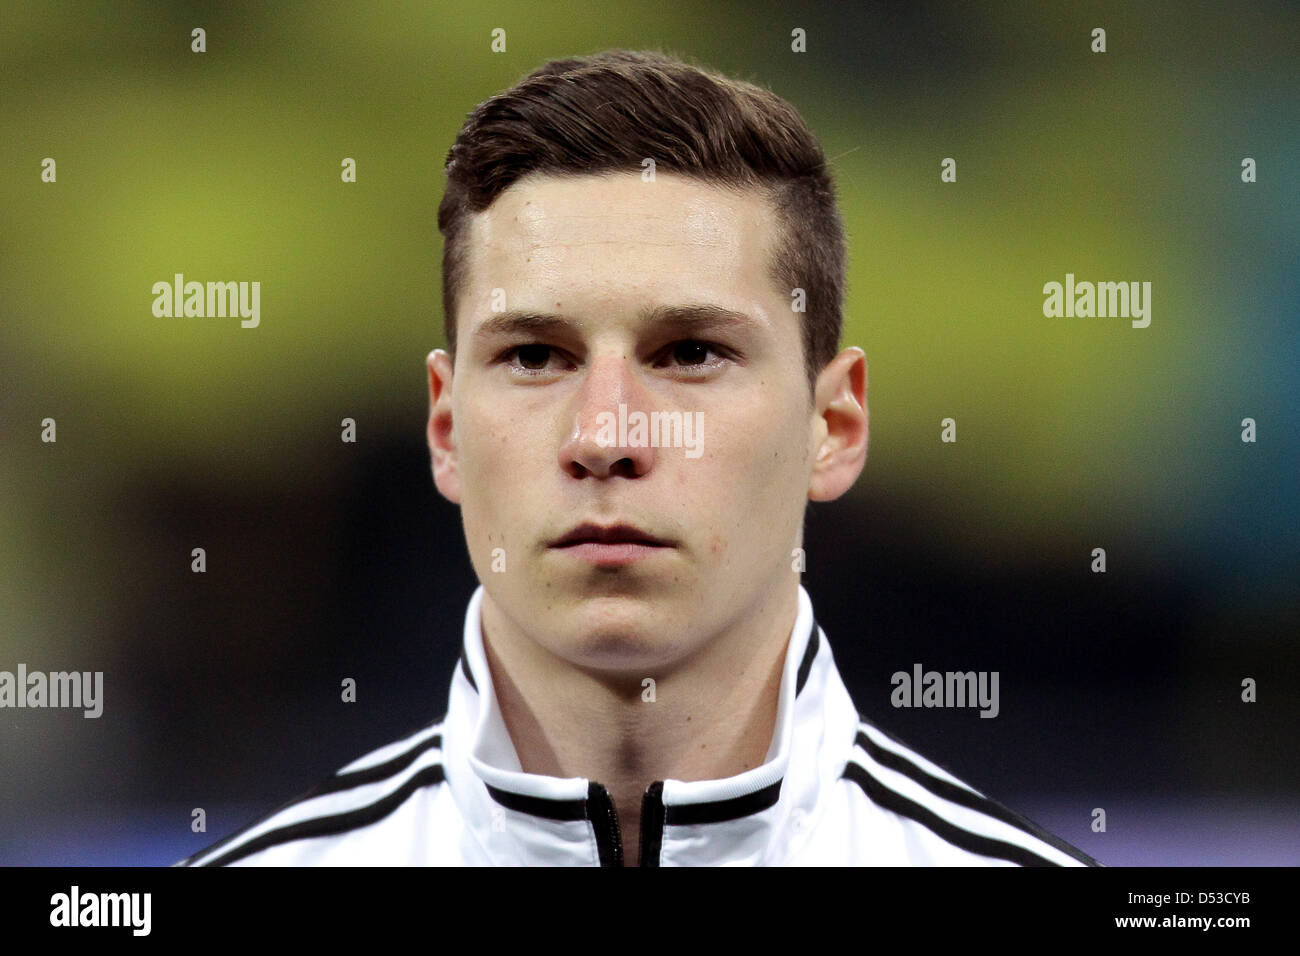 Germany's Julian Draxler during the FIFA World Cup 2014 qualification group C soccer match between Kazakhstan and Germany at Astana Arena in Astana, Kazakhstan, 22 March 2013. Photo: Fredrik von Erichsen/dpa Stock Photo